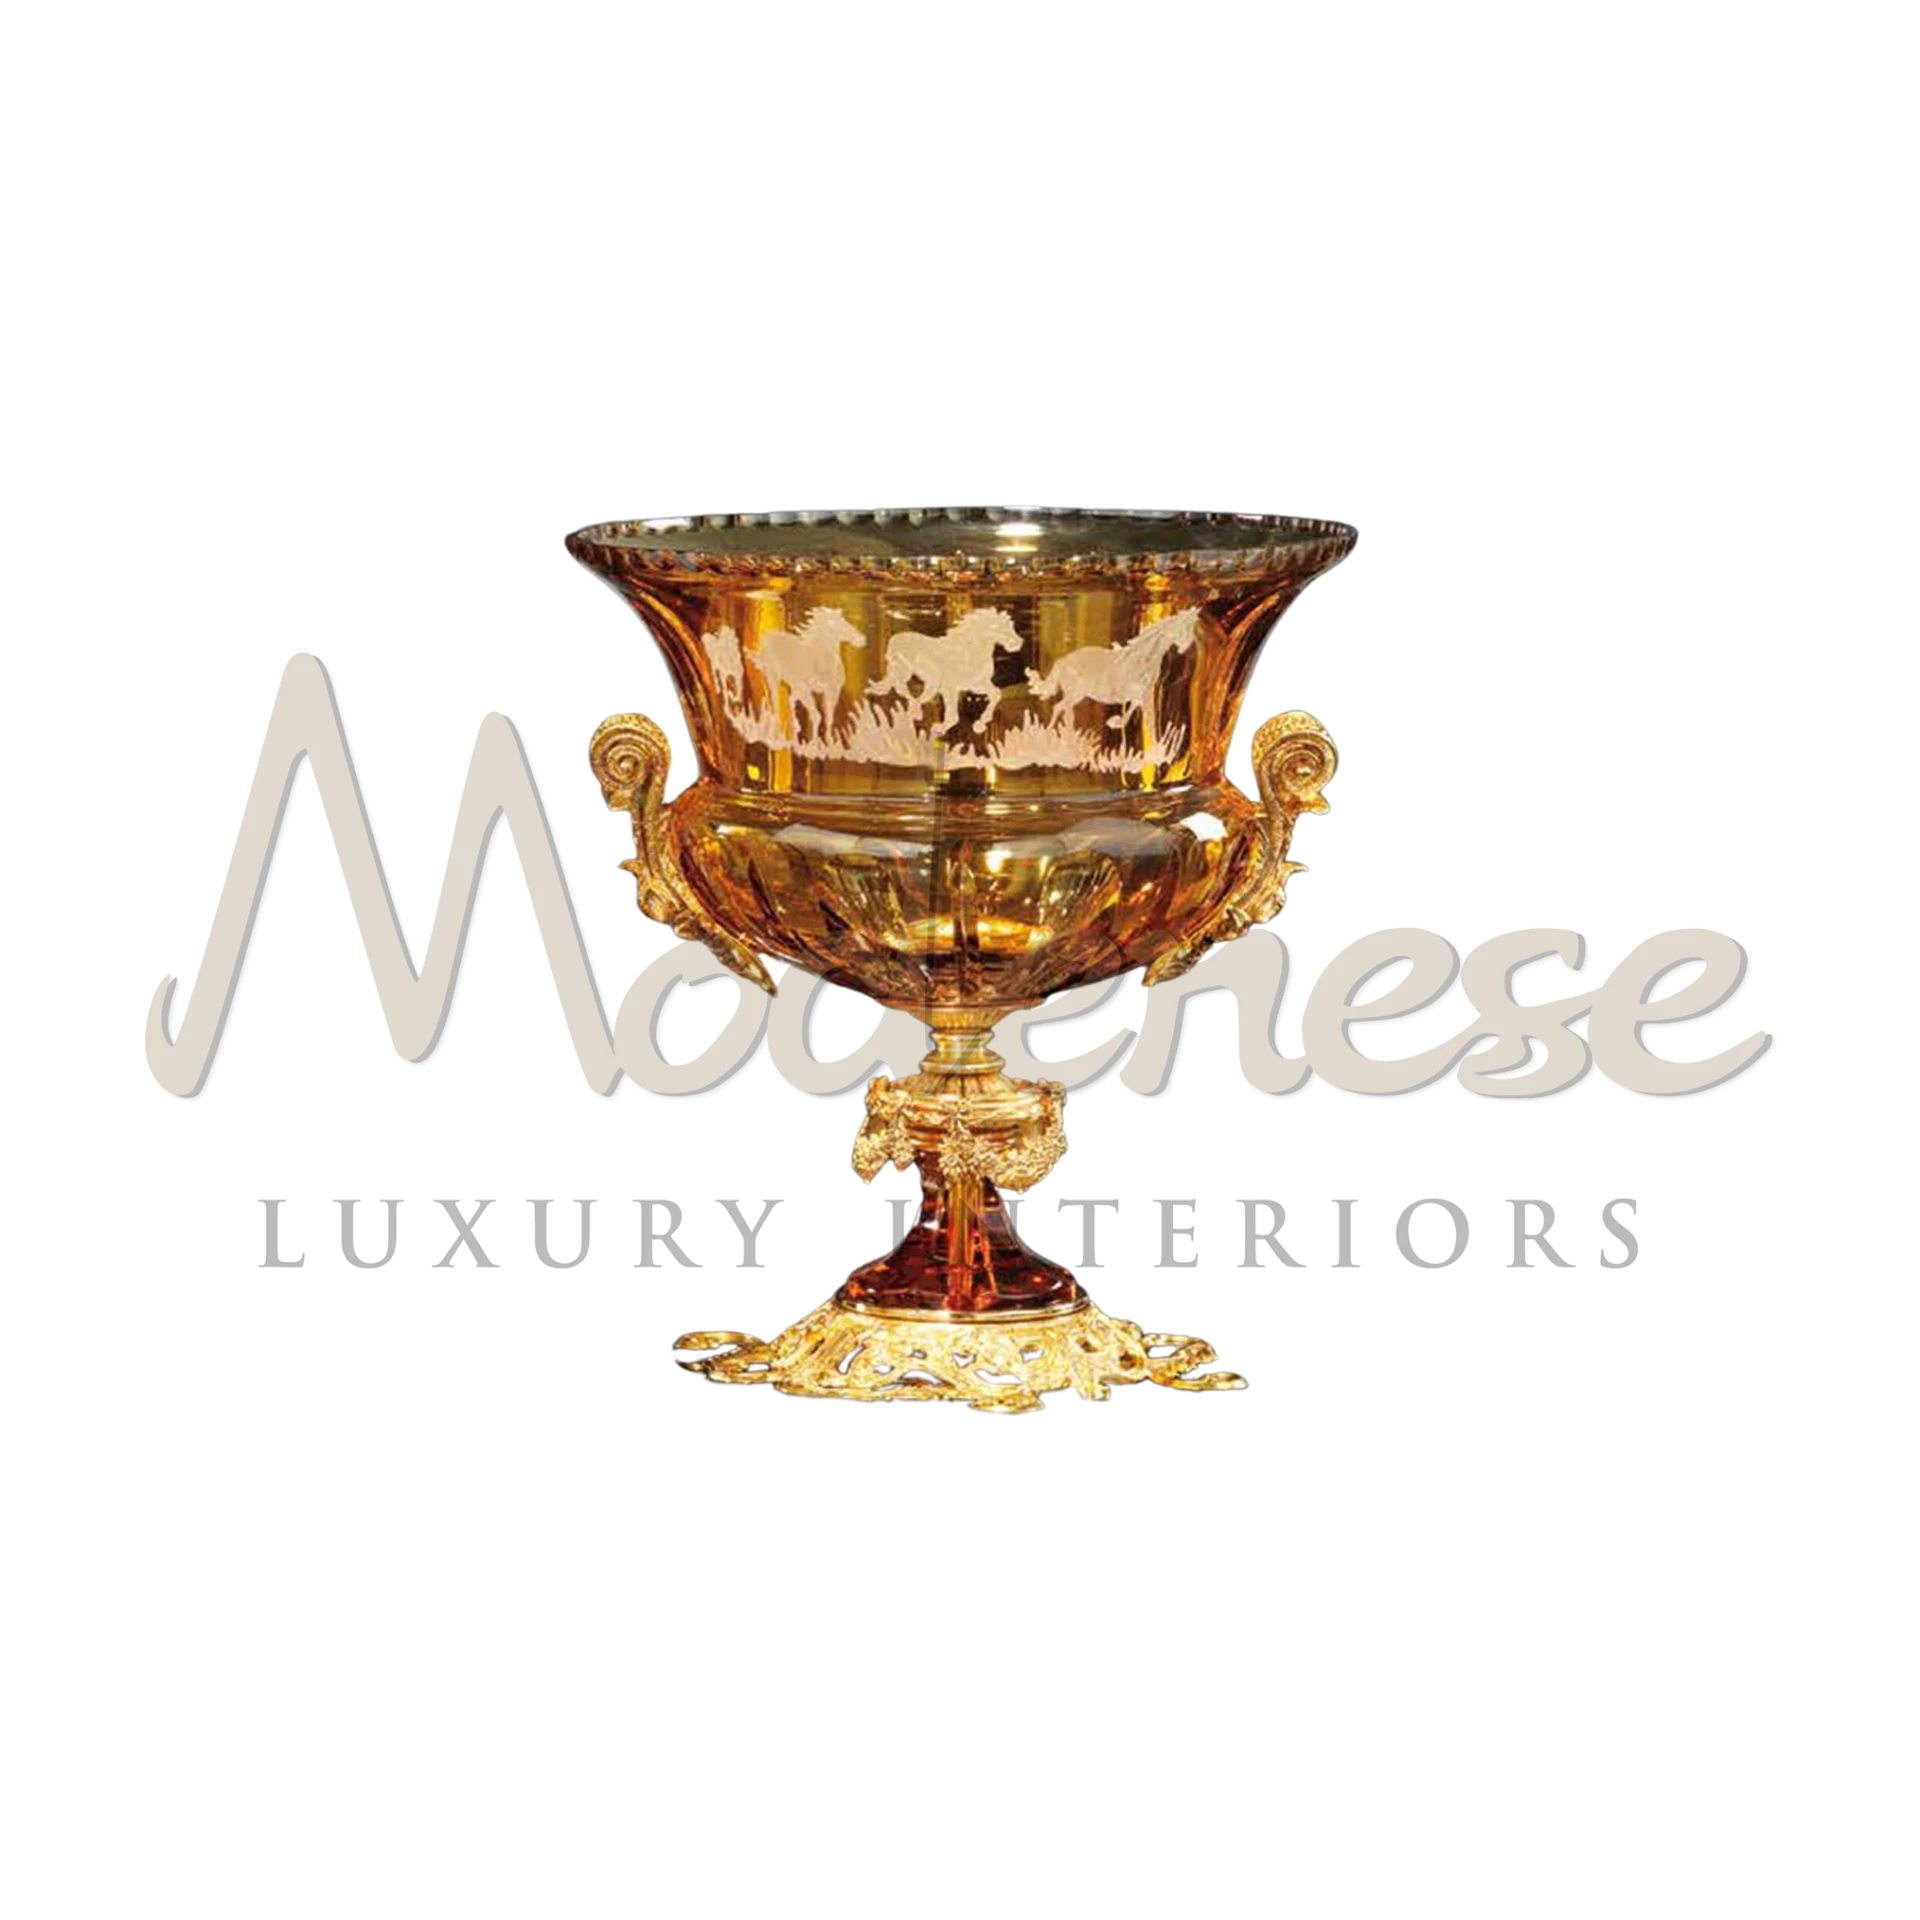 Imperial Luxury Box with Horses, showcasing royal elegance in high-quality materials with ornate details.